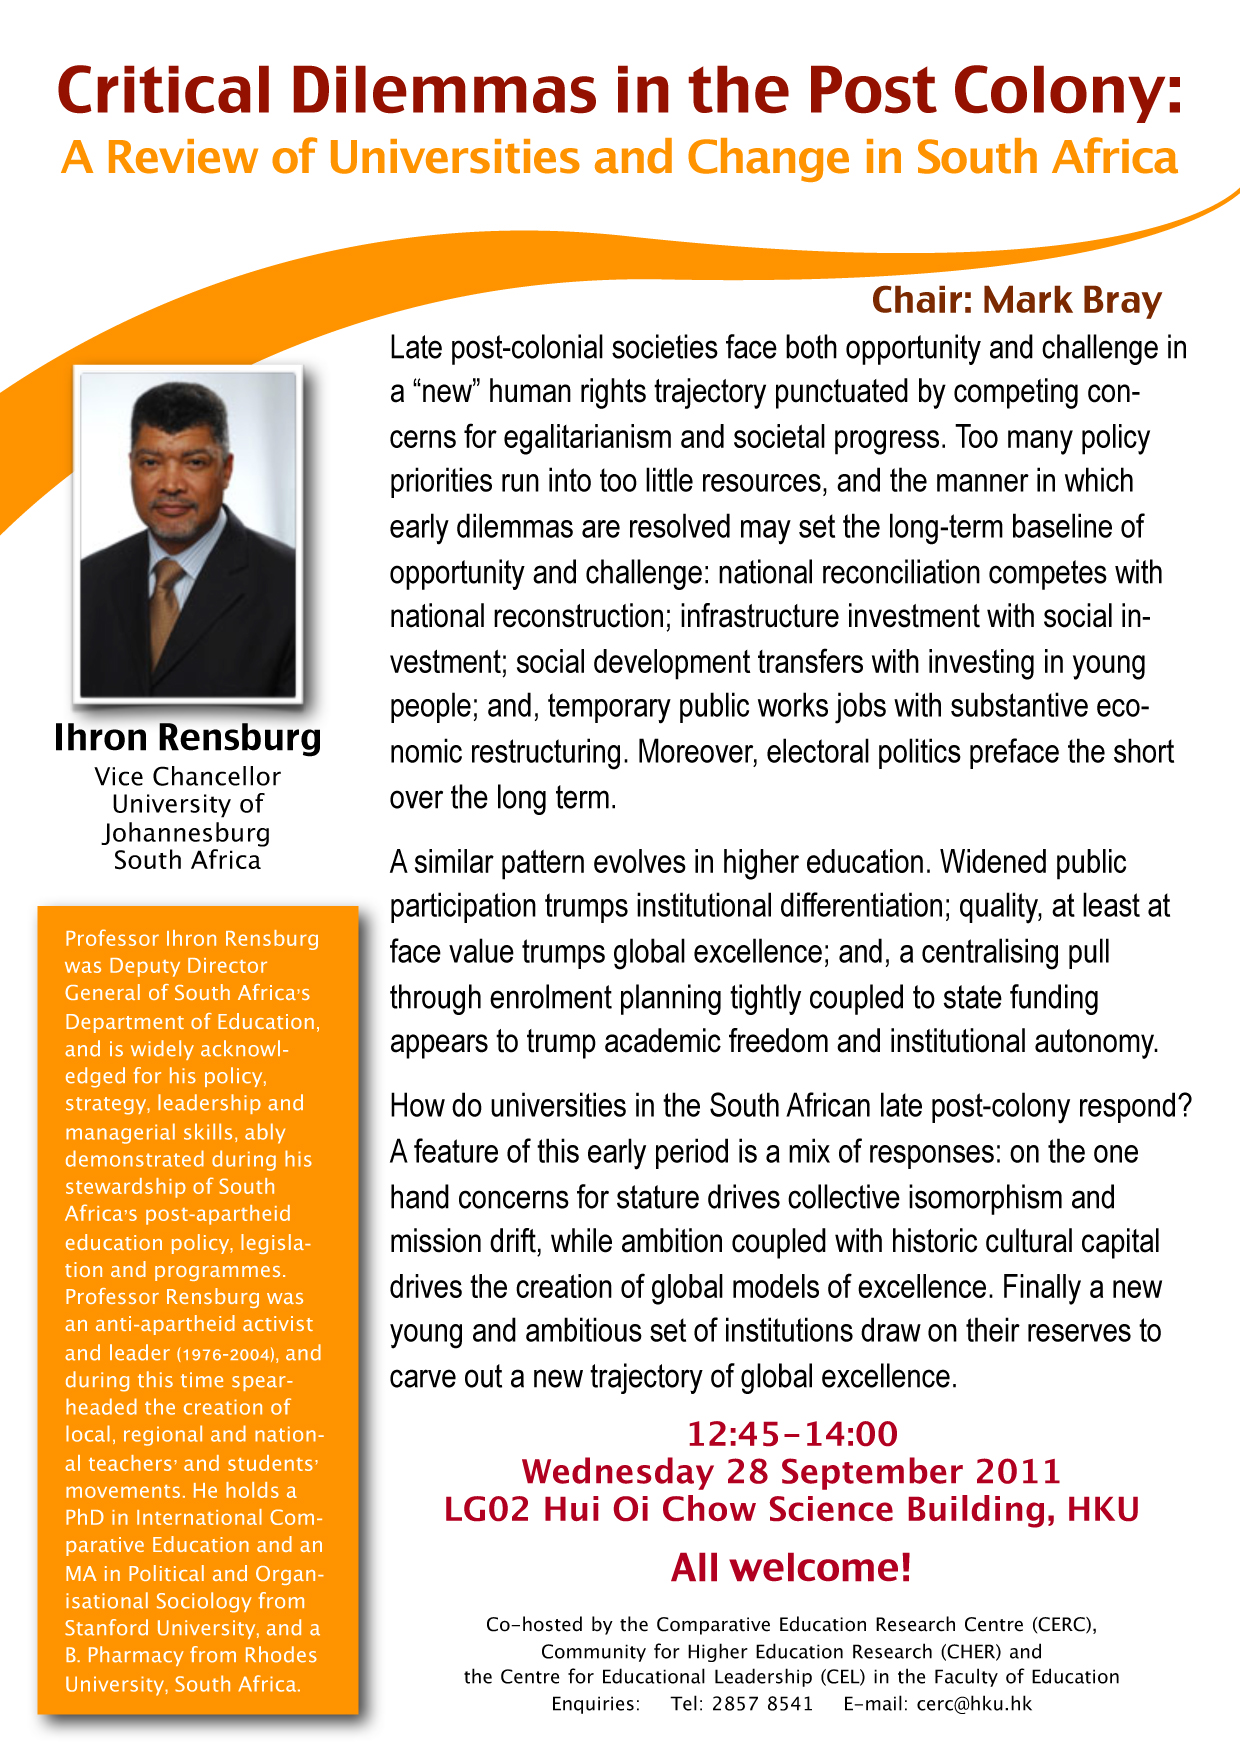 Seminar: Critical Dilemmas in the Post Colony: A Review of Universities and Change in South Africa